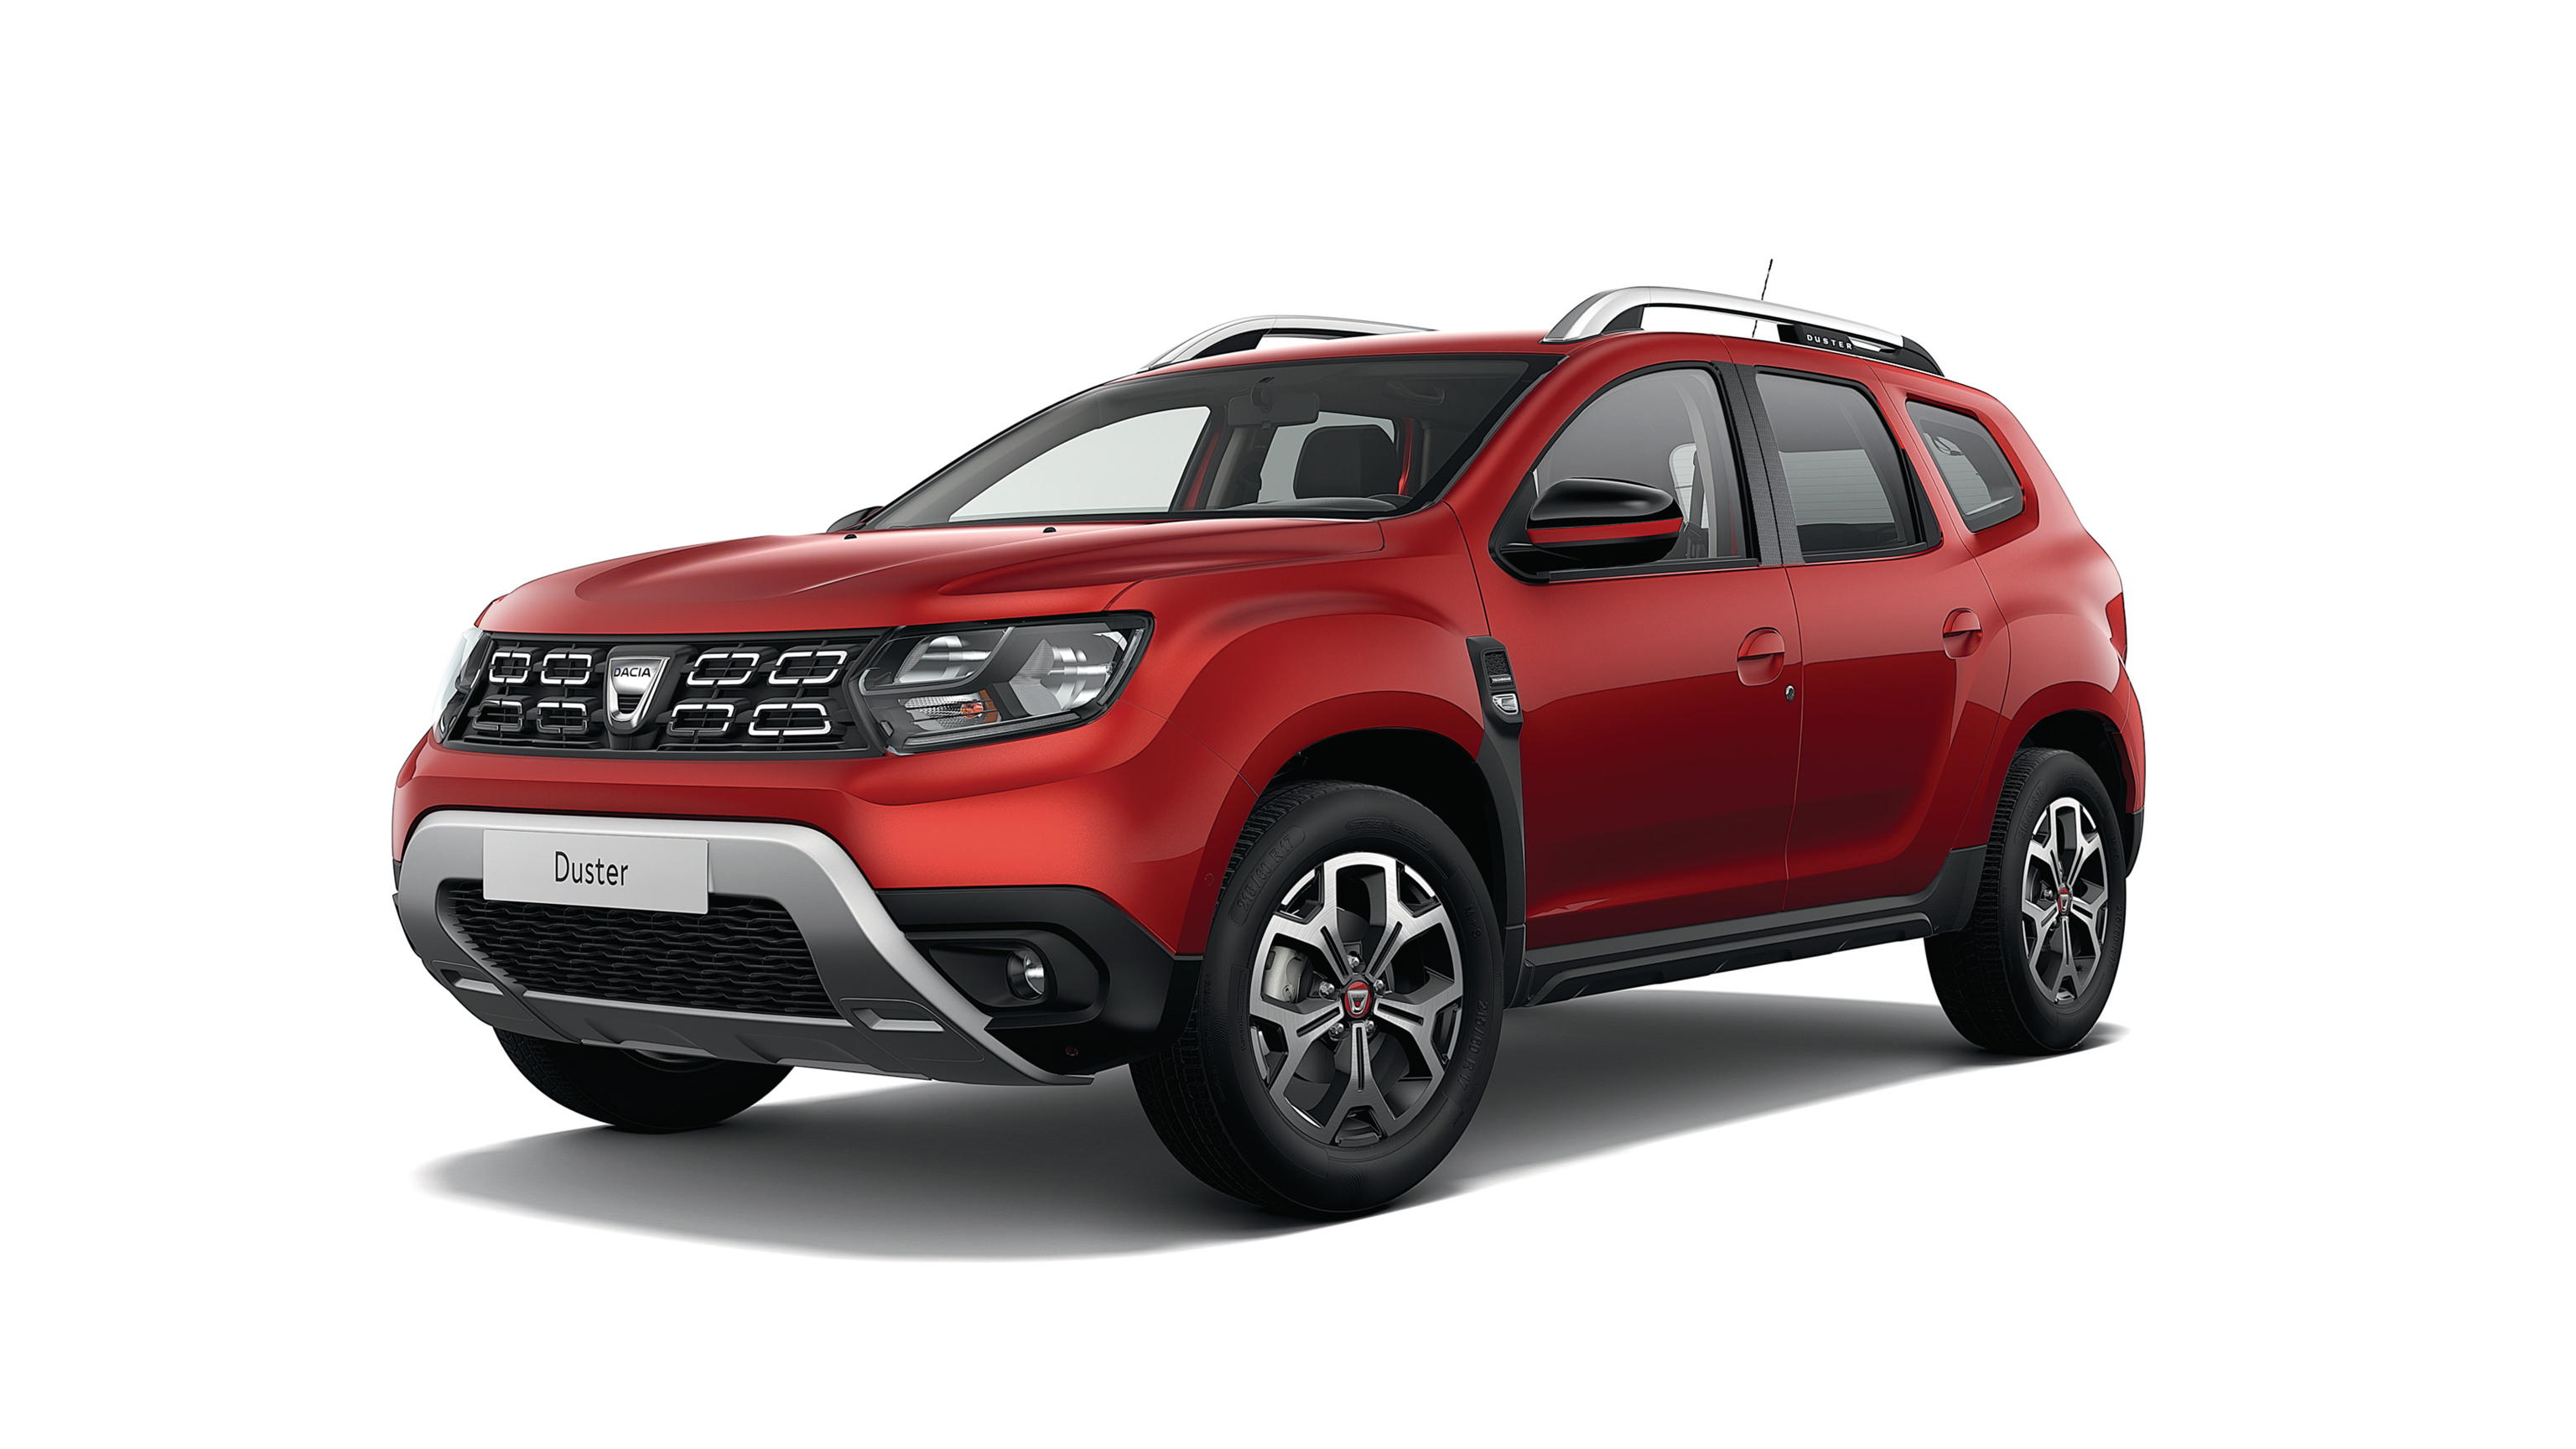 Personal Contract Purchase Dacia  Duster  Renault Offers